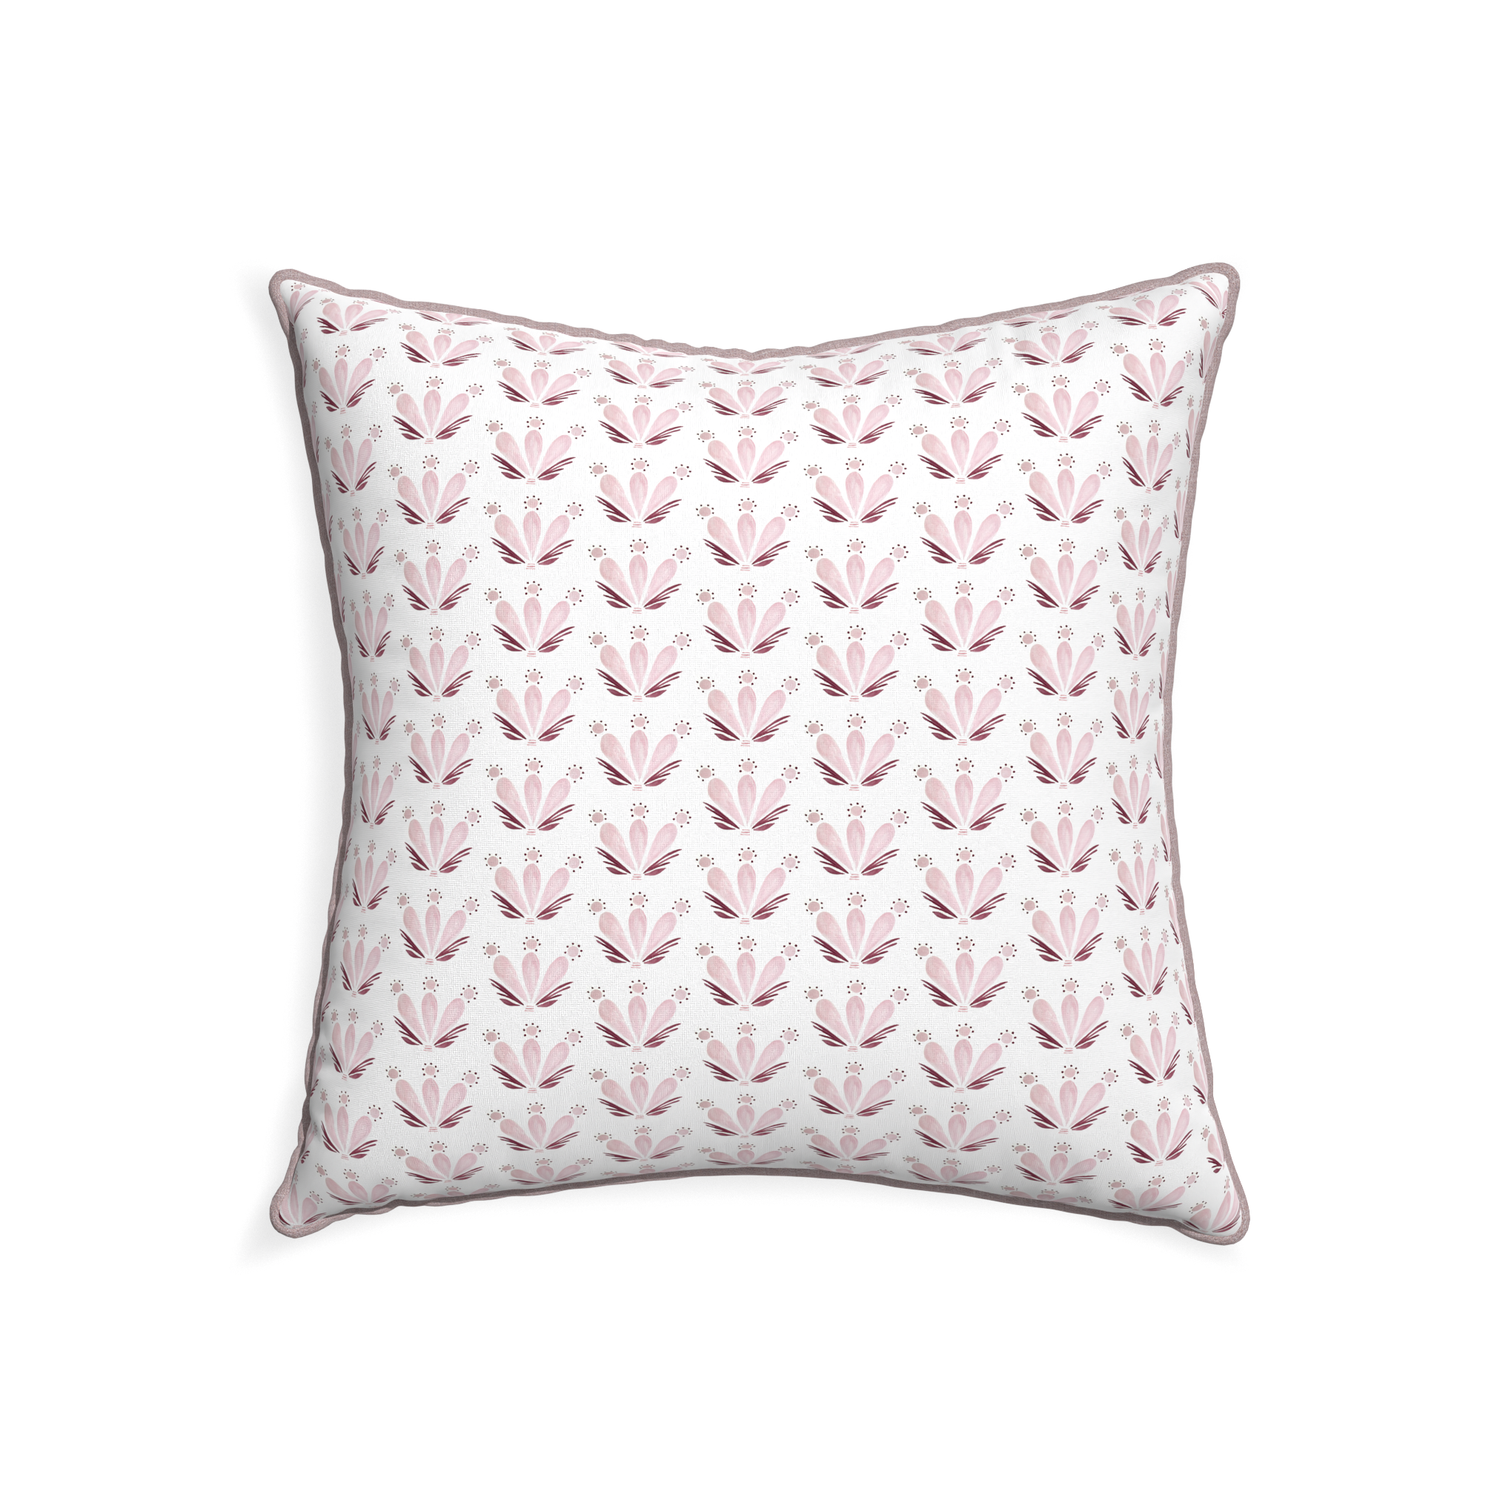 22-square serena pink custom pink & burgundy drop repeat floralpillow with orchid piping on white background